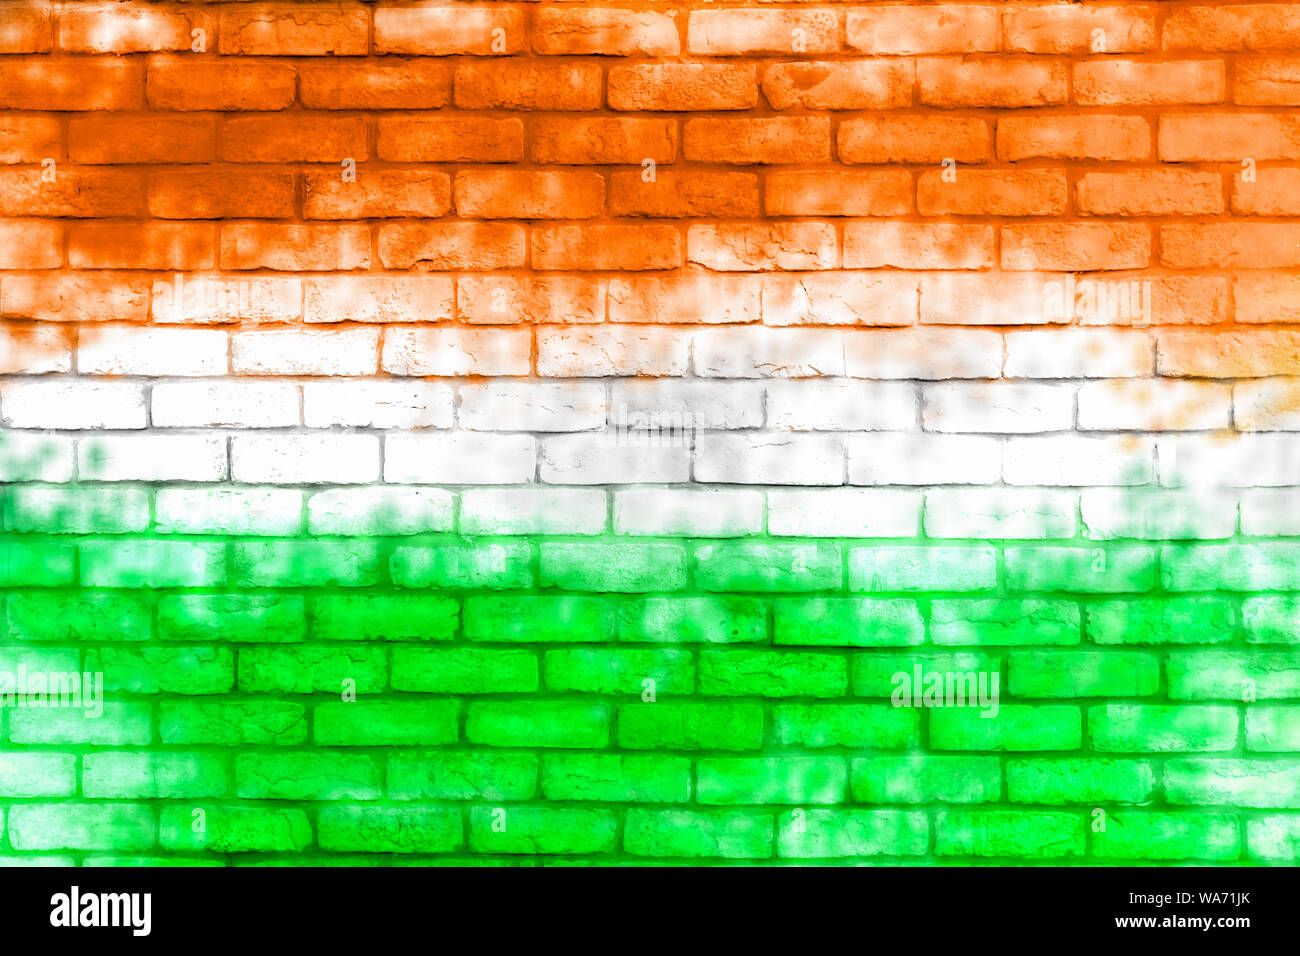 Colorful brick wall background. Walls painted with the India flag color. Stock Photo